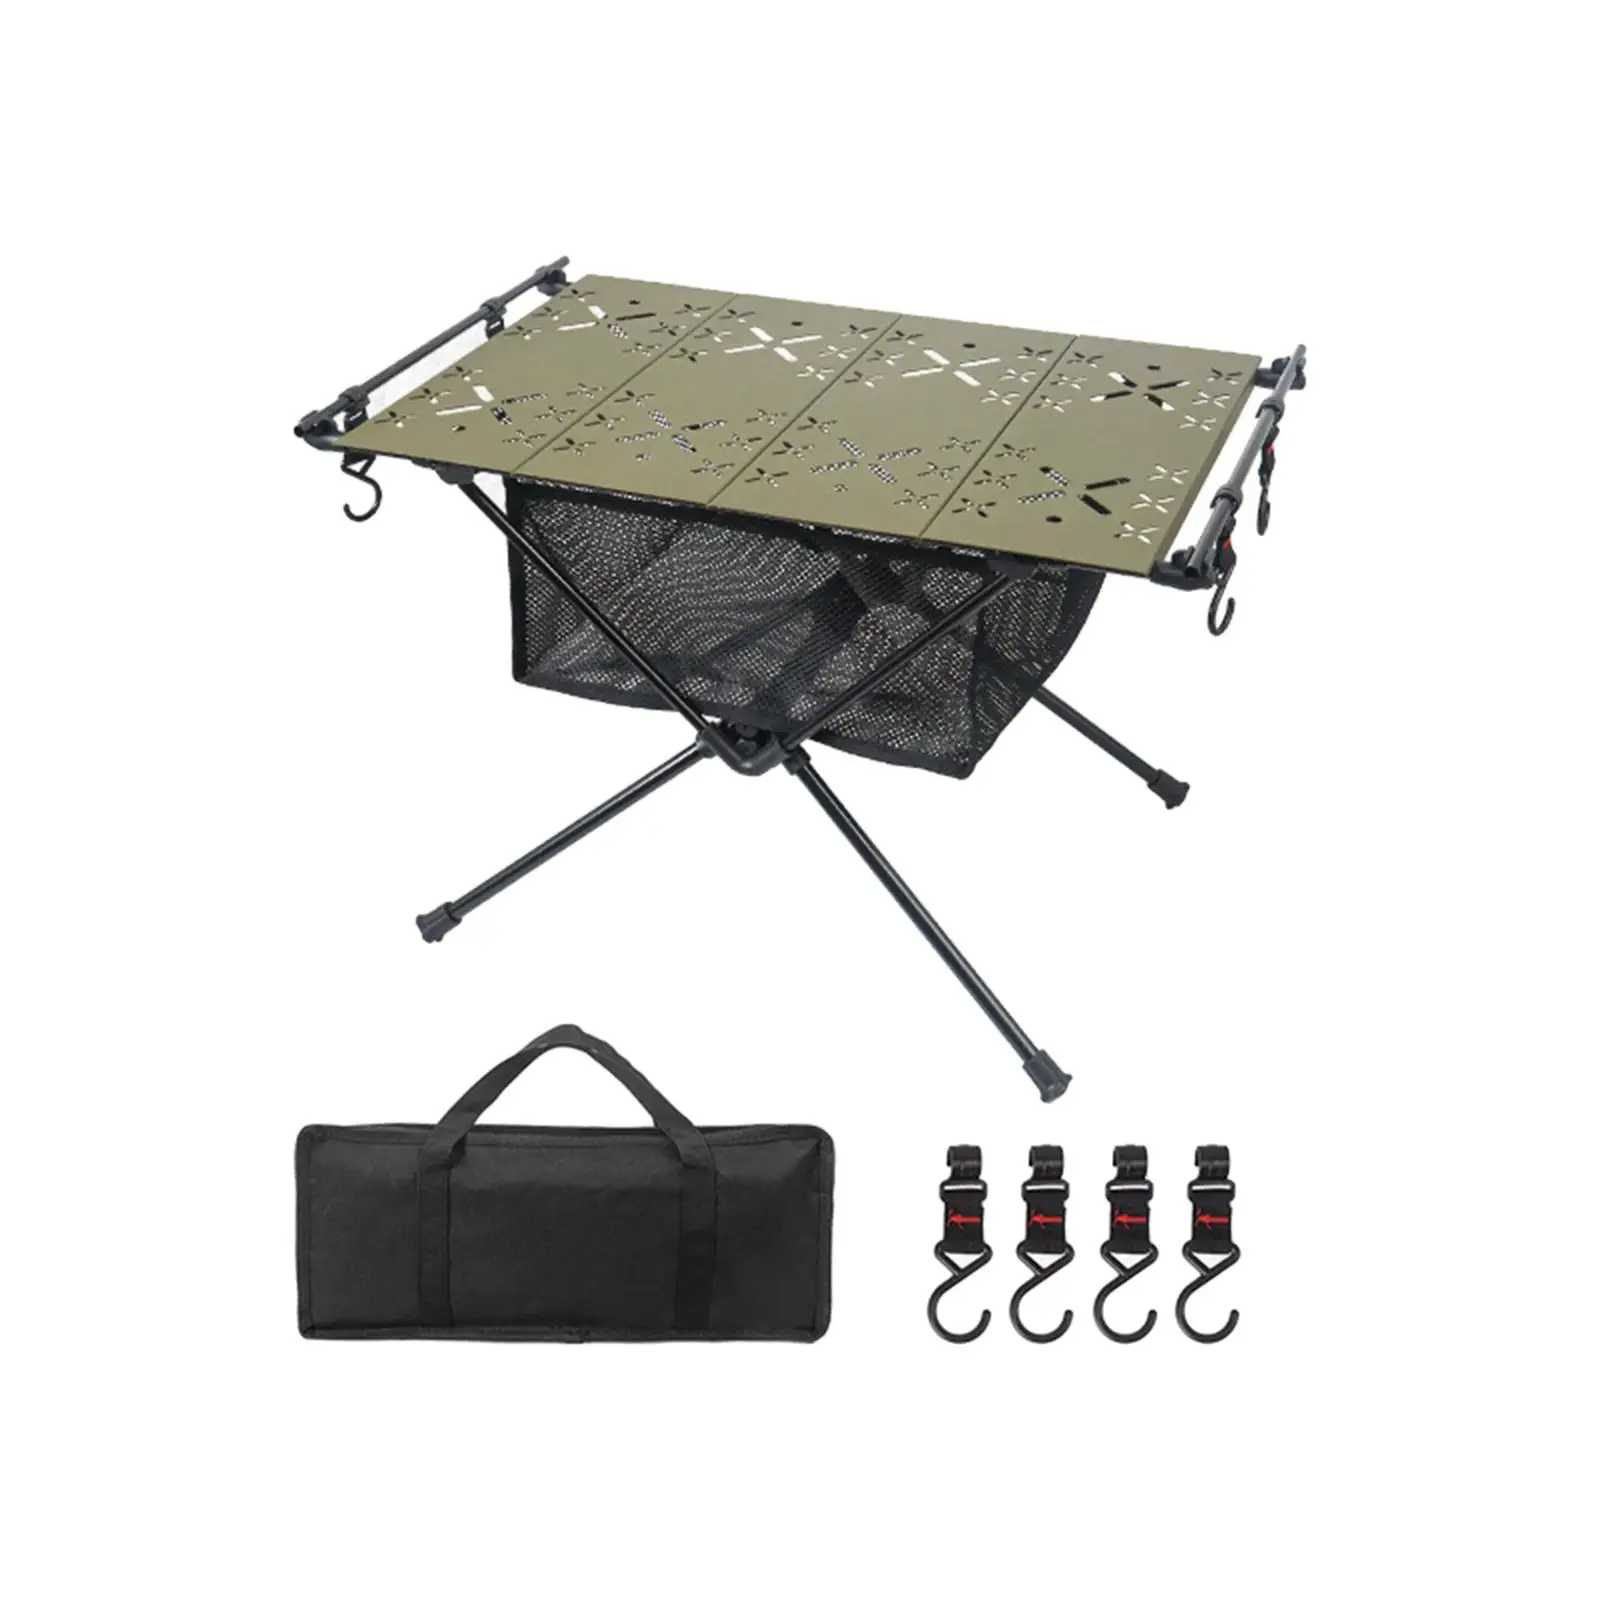 Folding Camping Table Aluminum Alloy with Carry Bag Ultralight Desk Outdoor Table for Yard Backpacking Fishing Picnic